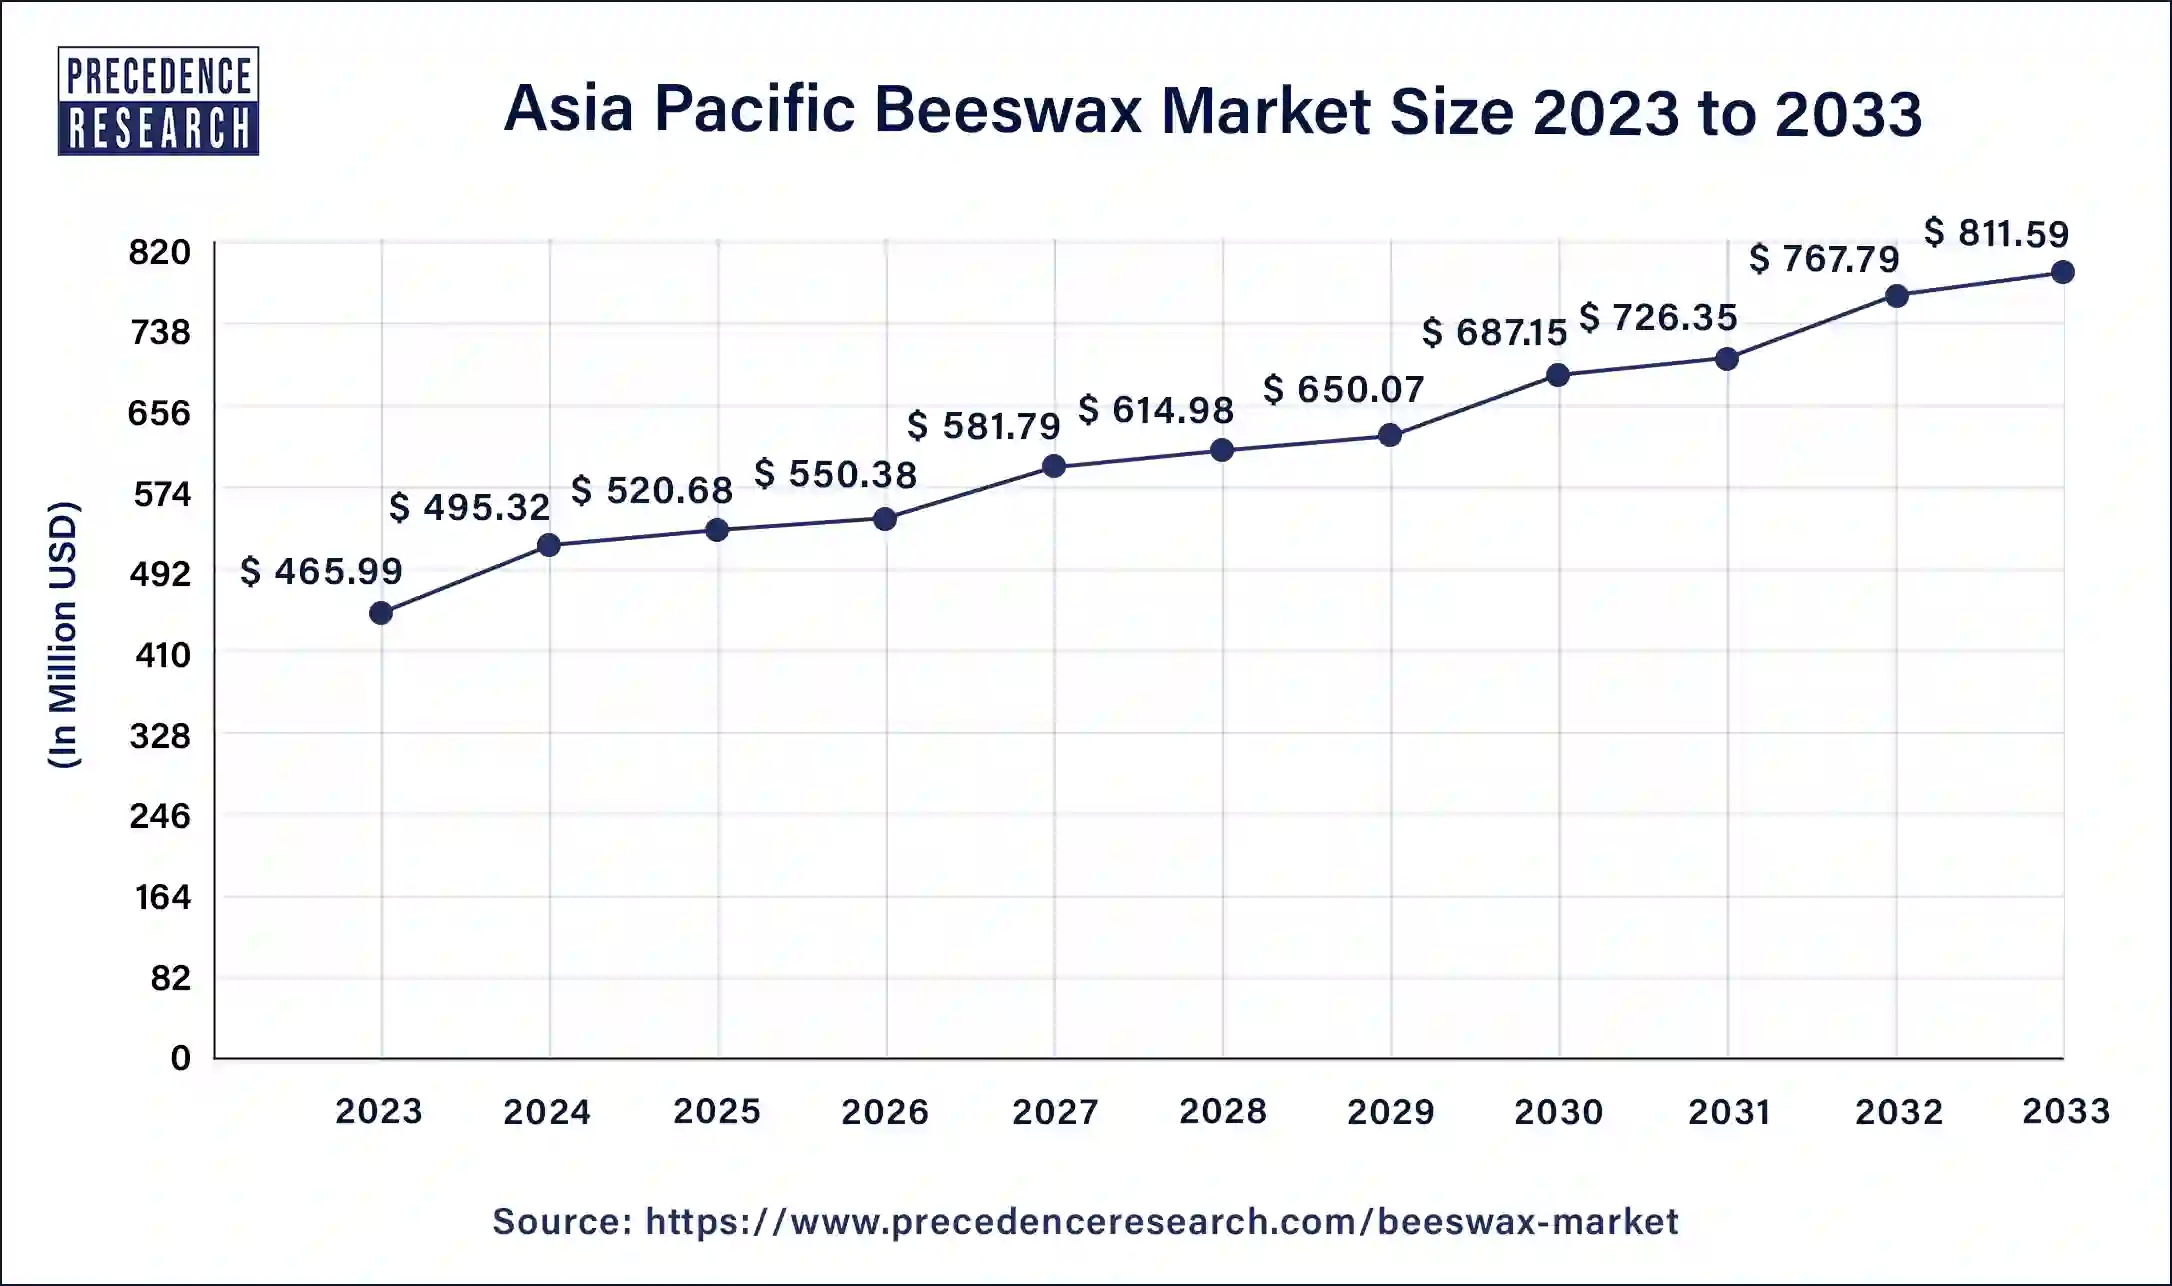 Asia Pacific Beeswax Market Size 2024 to 2033